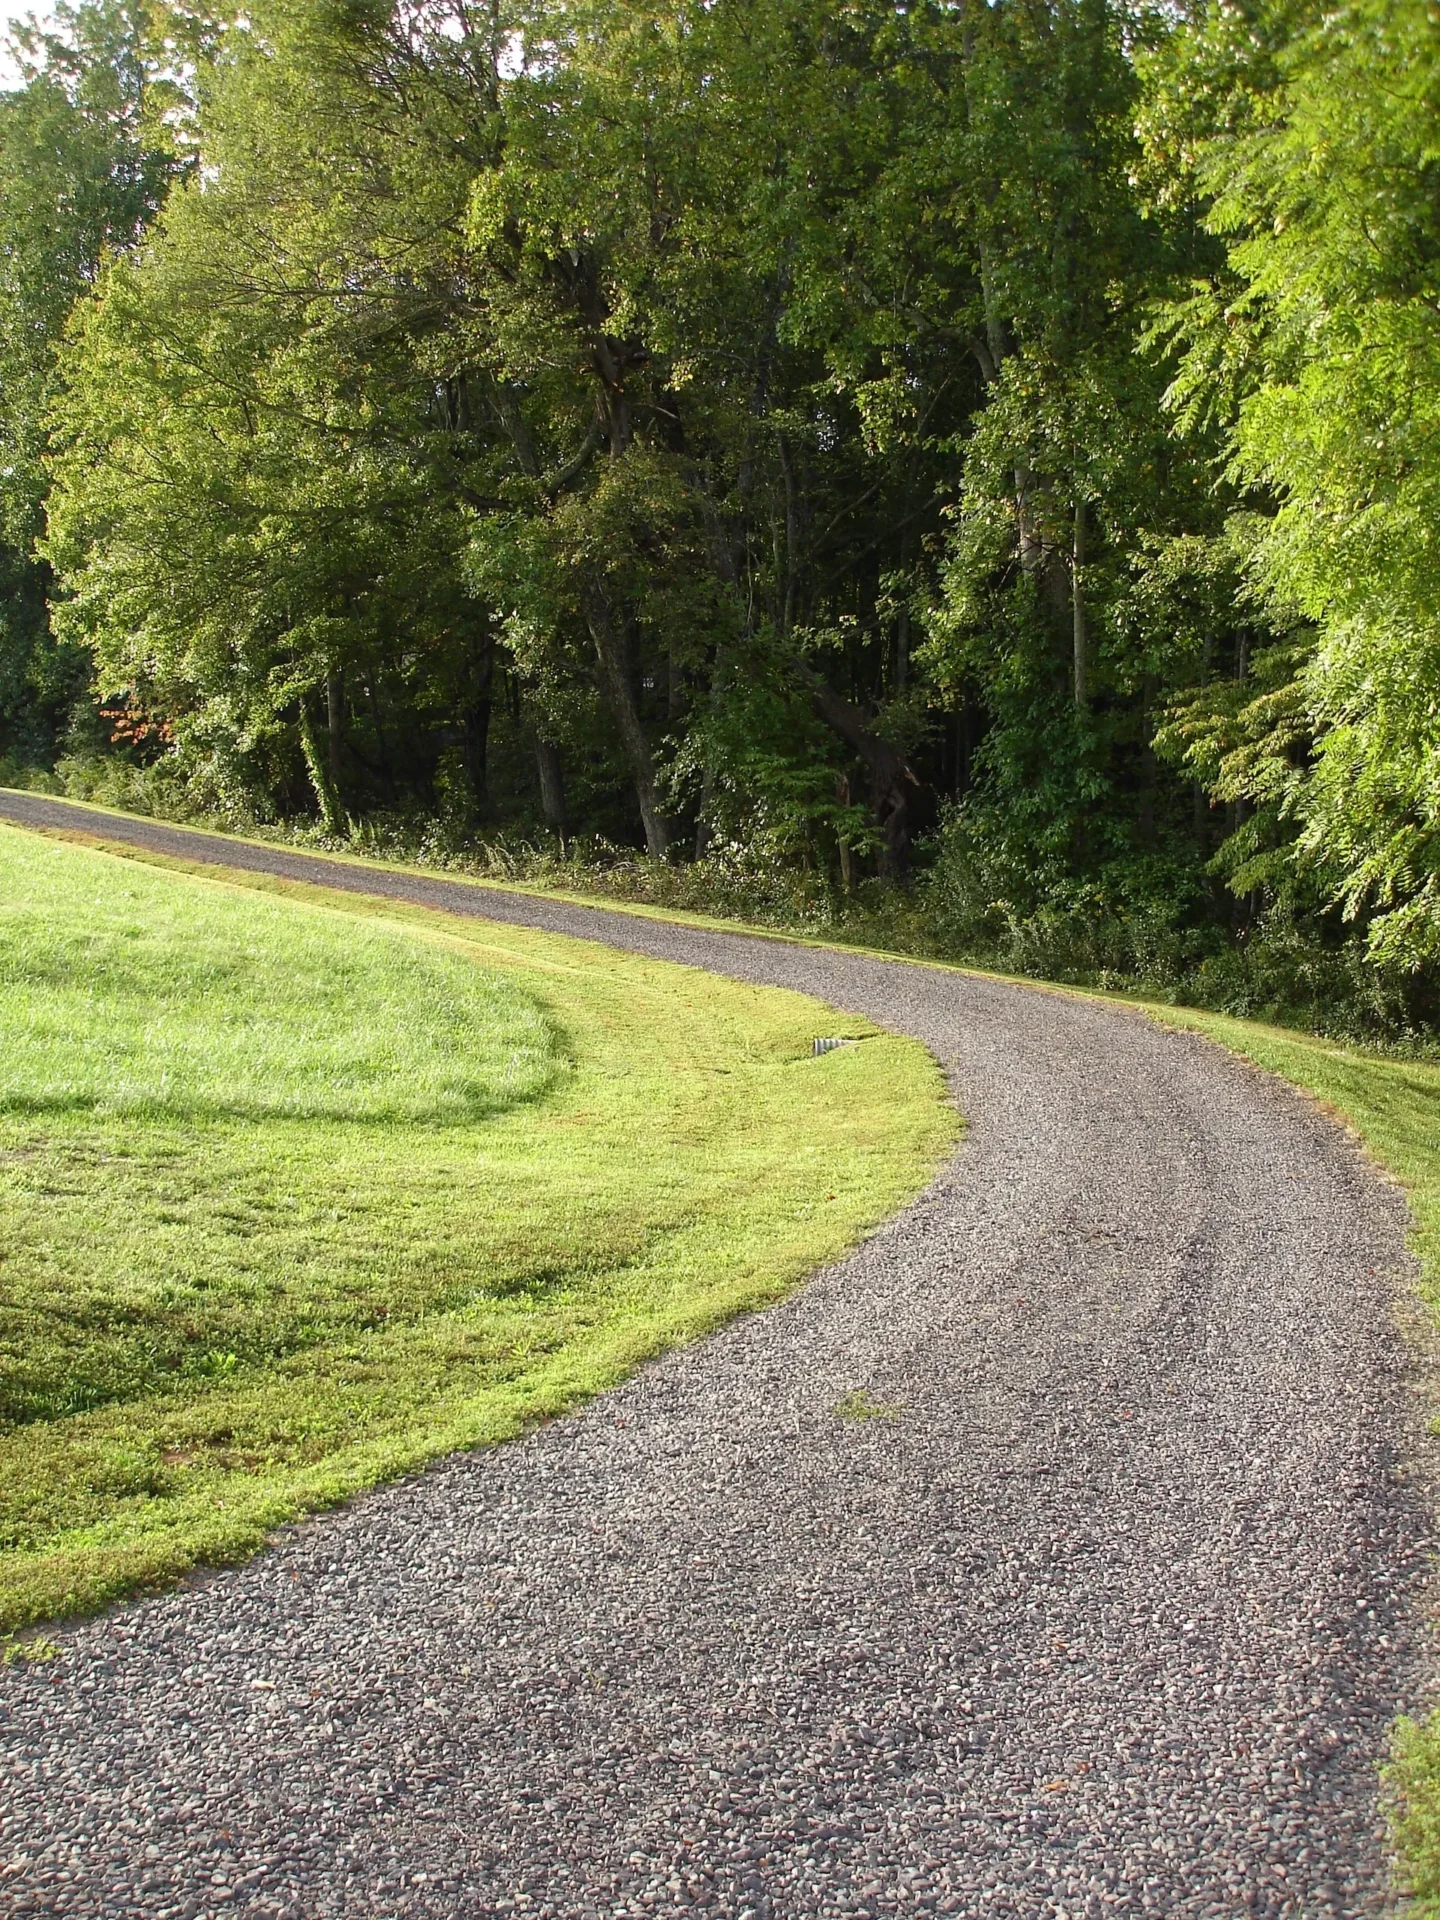 A road with grass and trees in the background.